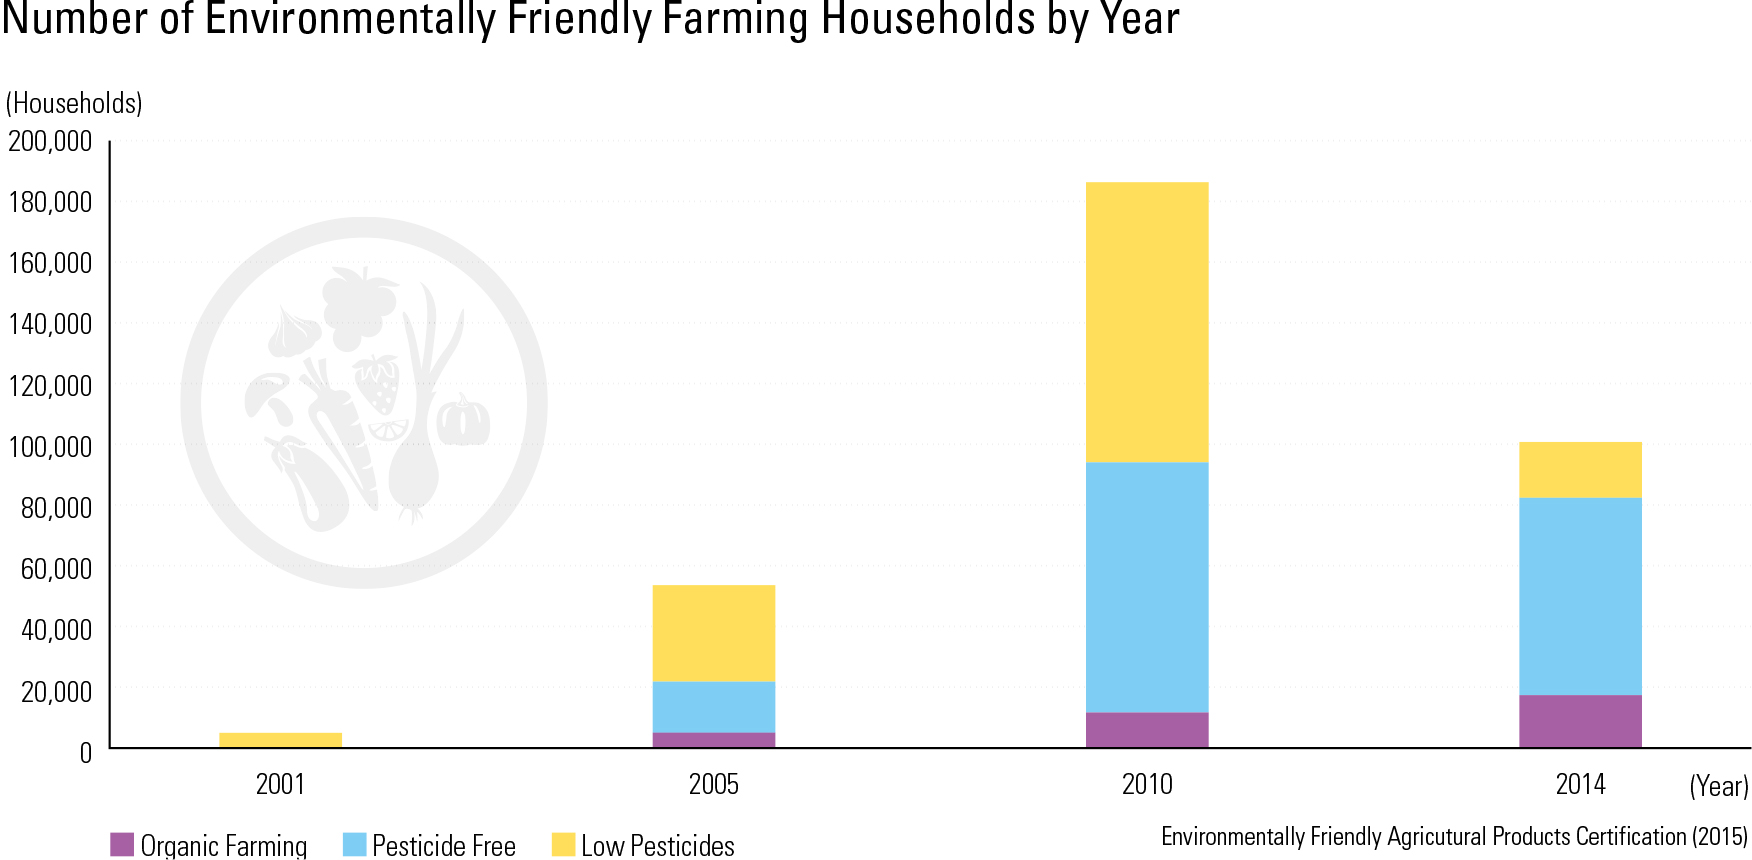 Number of Environmentally Friendy Farming Housesholds by Year<p class="oz_zoom" zimg="http://imagedata.cafe24.com/us_2/us2_66-6_2.jpg"><span style="font-family:Nanum Myeongjo;"><span style="font-size:18px;"><span class="label label-danger">UPDATE DATA</span></span></p>